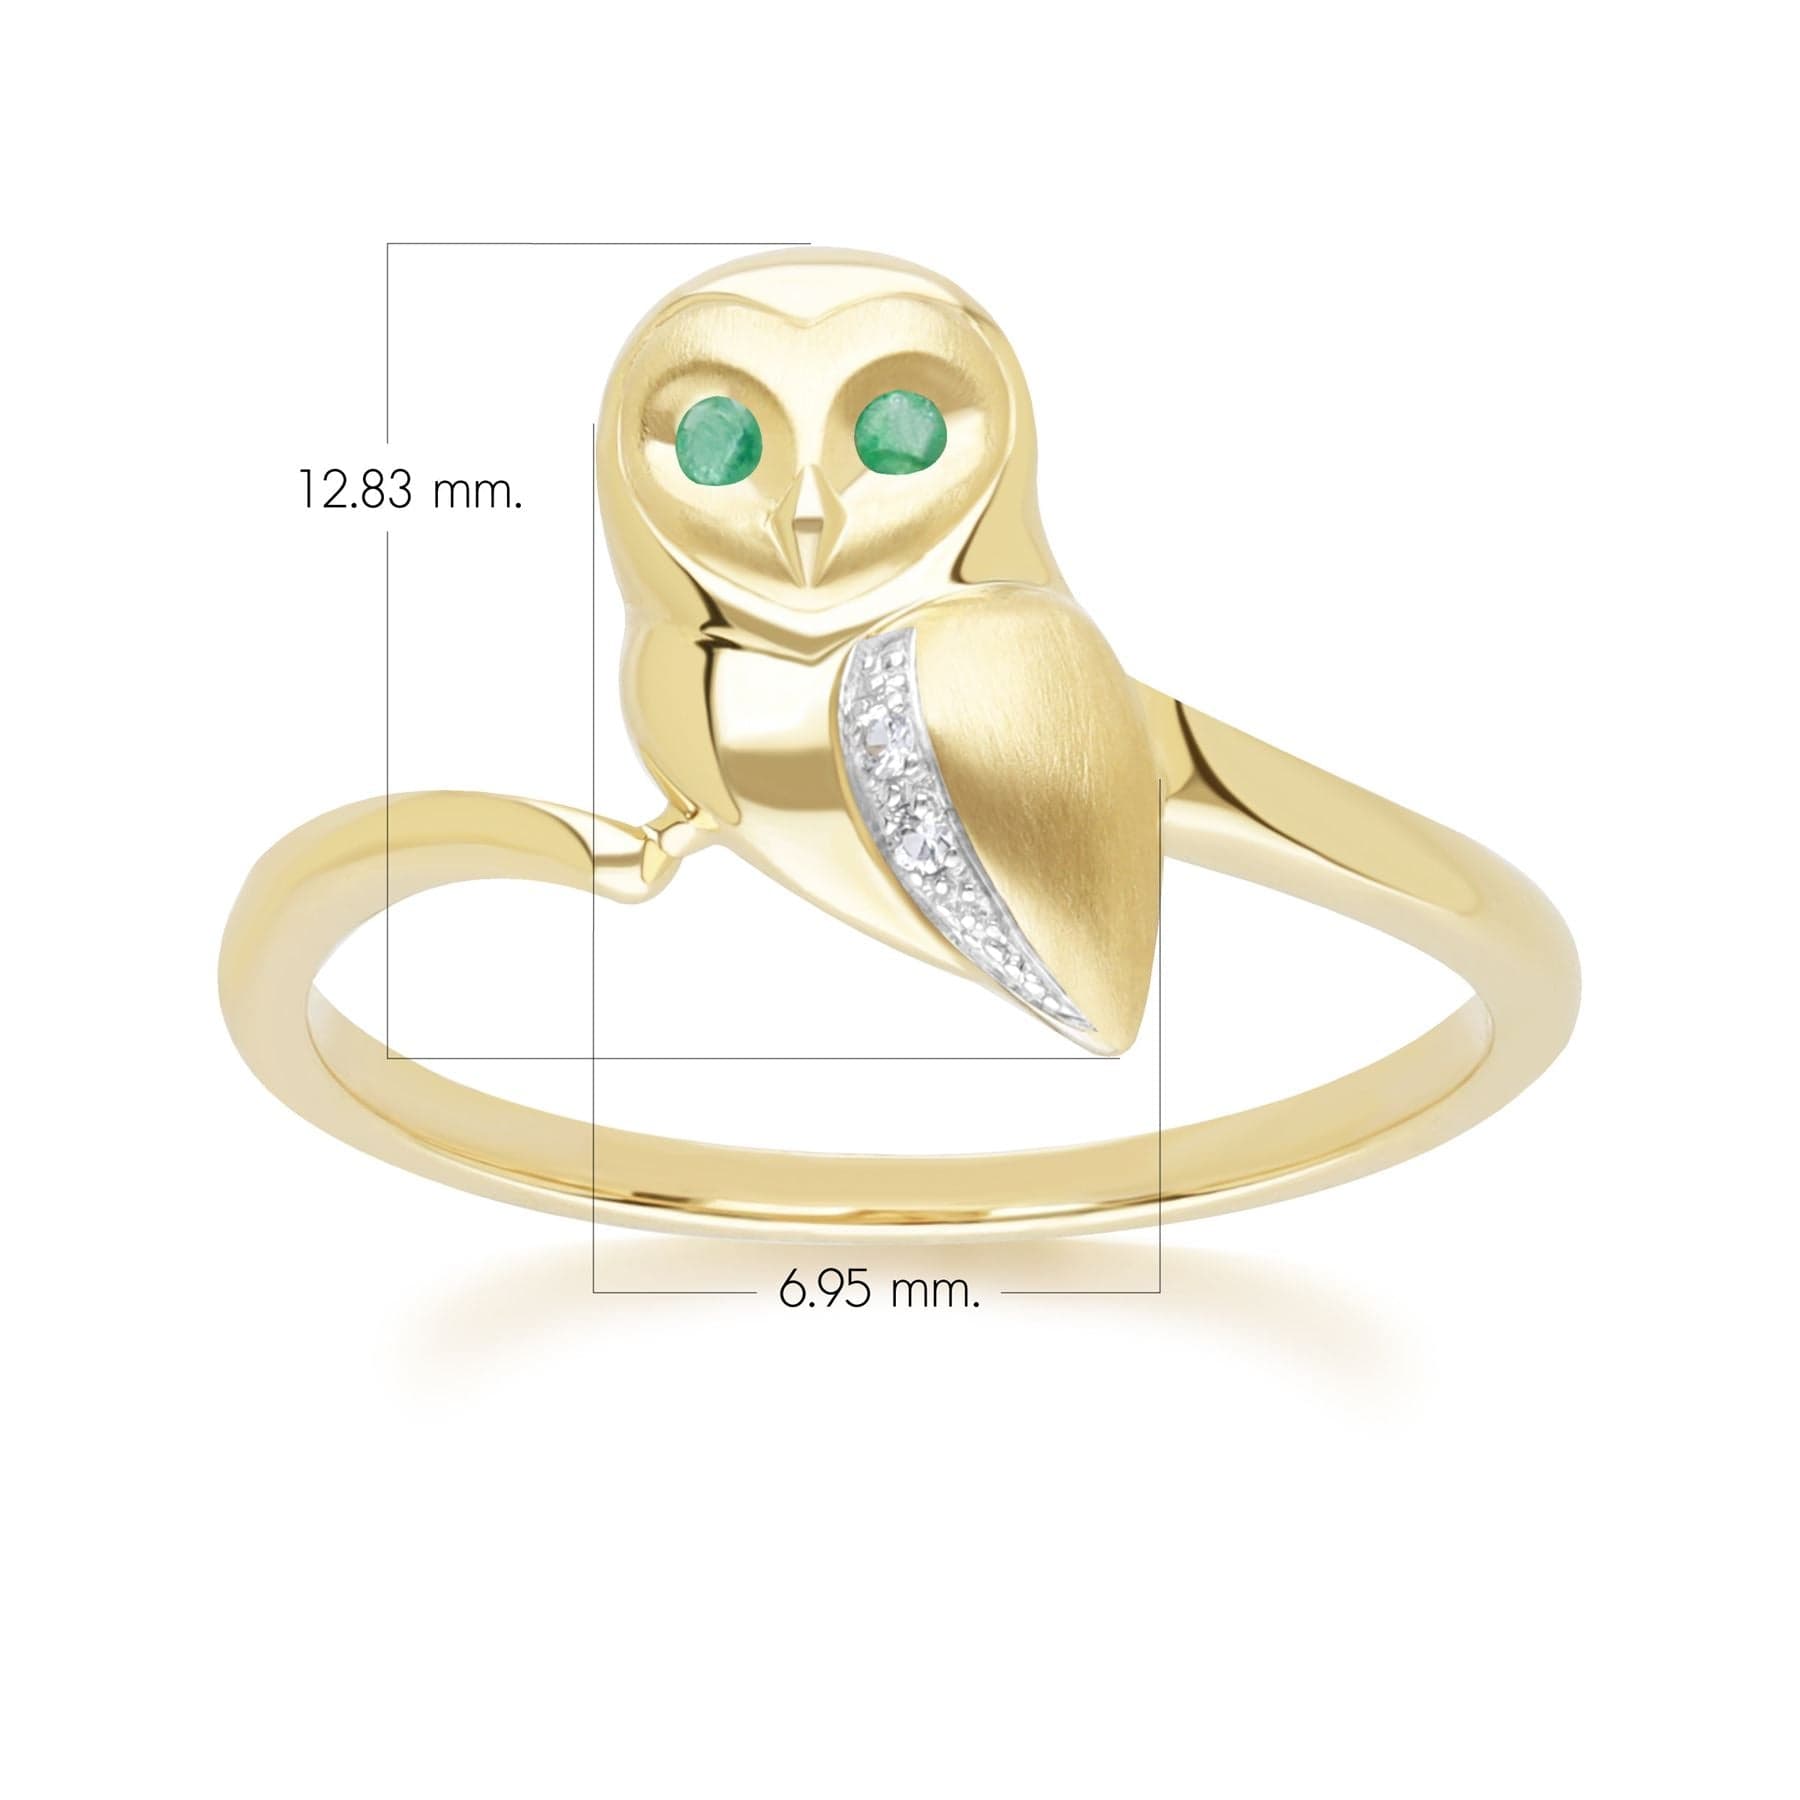 135R2103029 Gardenia Emerald and White Sapphire Owl Ring in 9ct Yellow Gold Dimensions